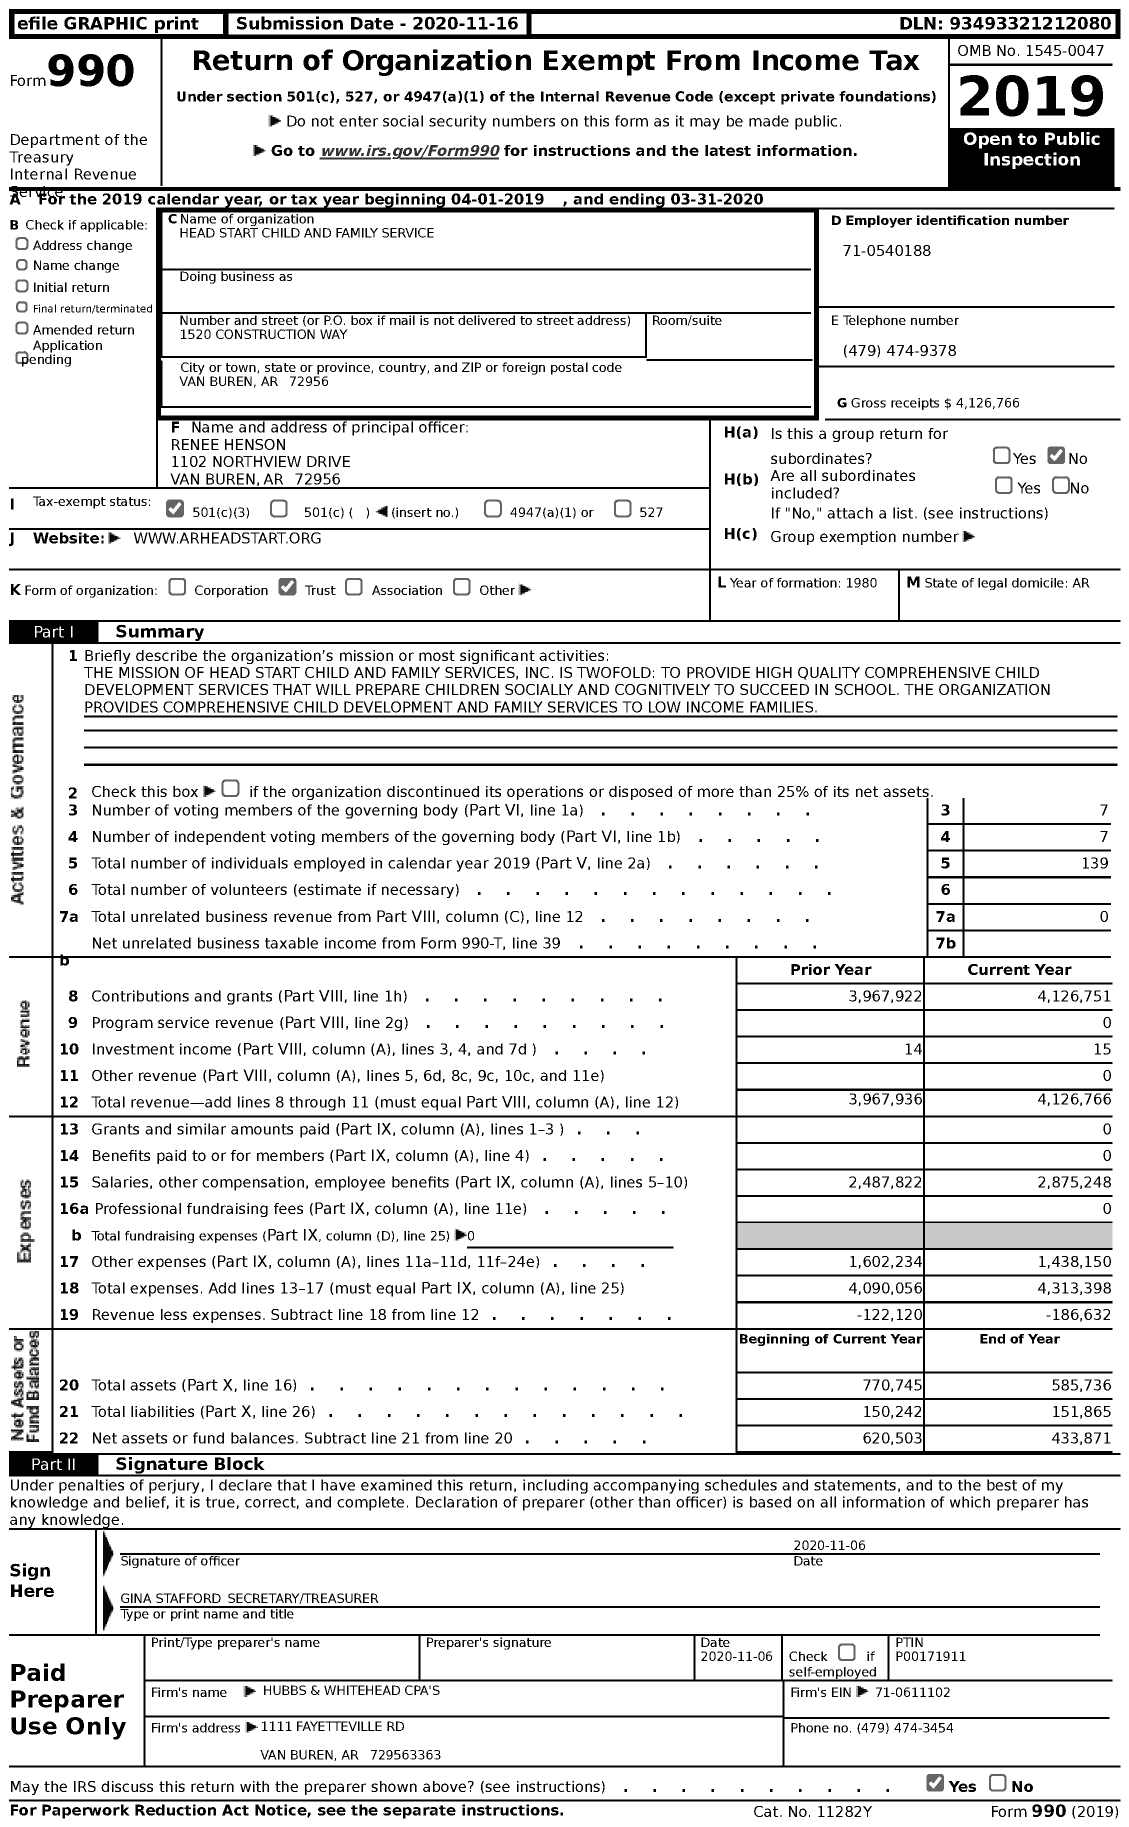 Image of first page of 2019 Form 990 for Head Start Child and Family Service